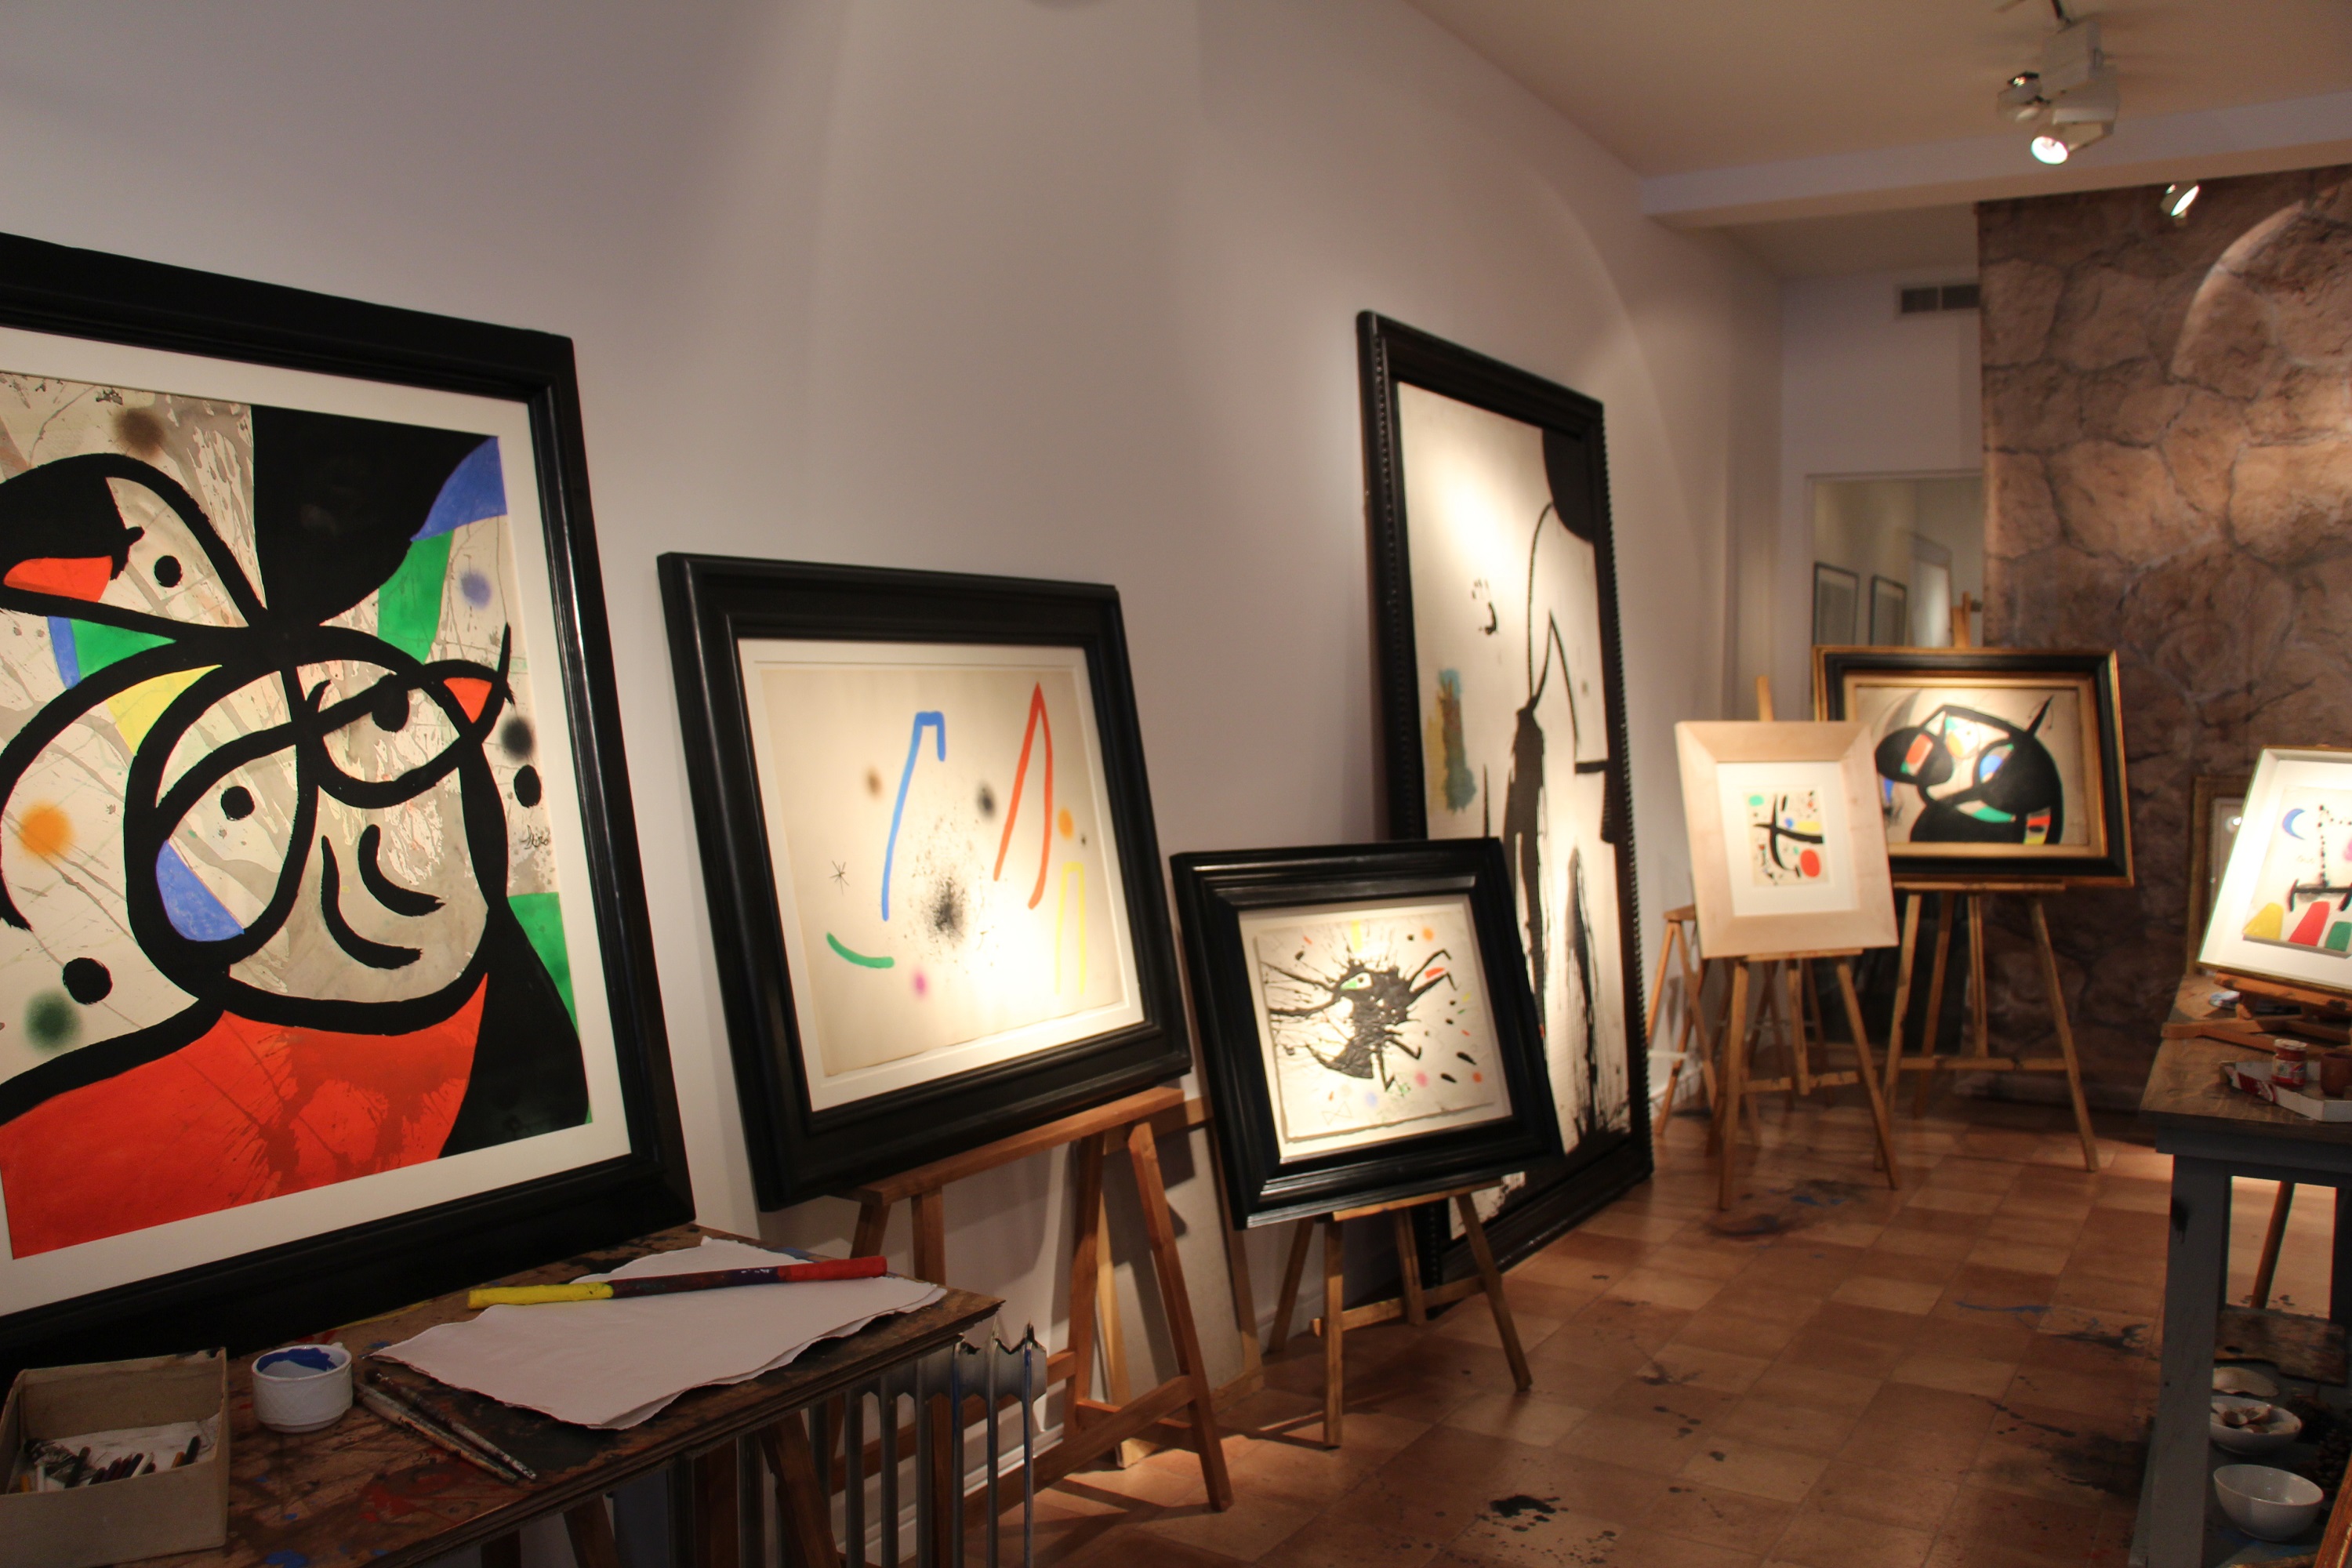 Image of the exhibition 'Miró's Studio' at London's Mayoral Gallery (by ACN)